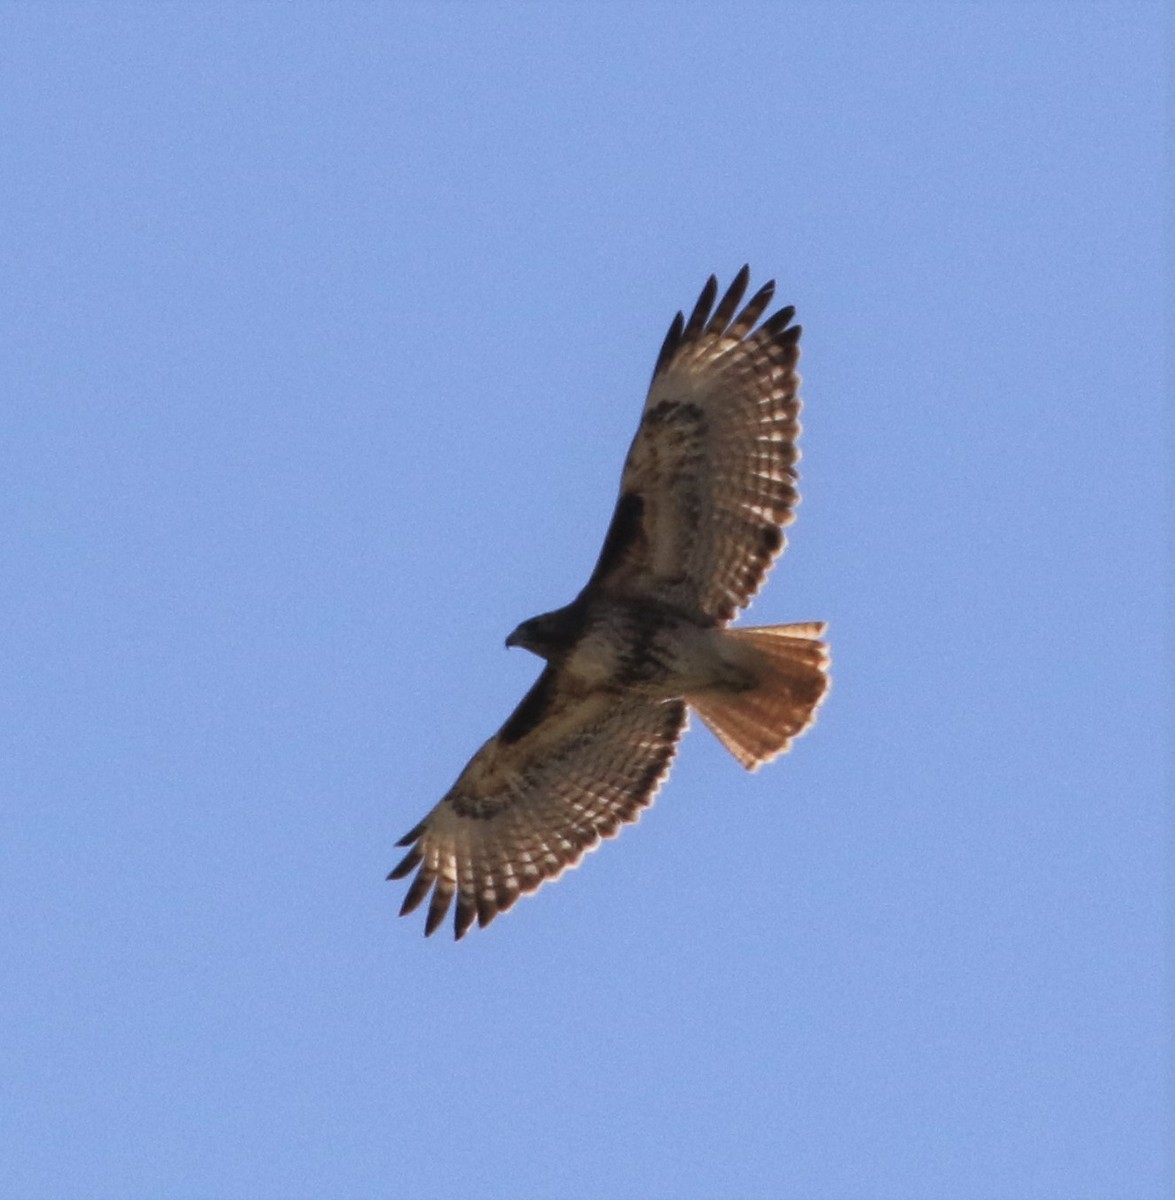 Red-tailed Hawk - Mike "mlovest" Miller